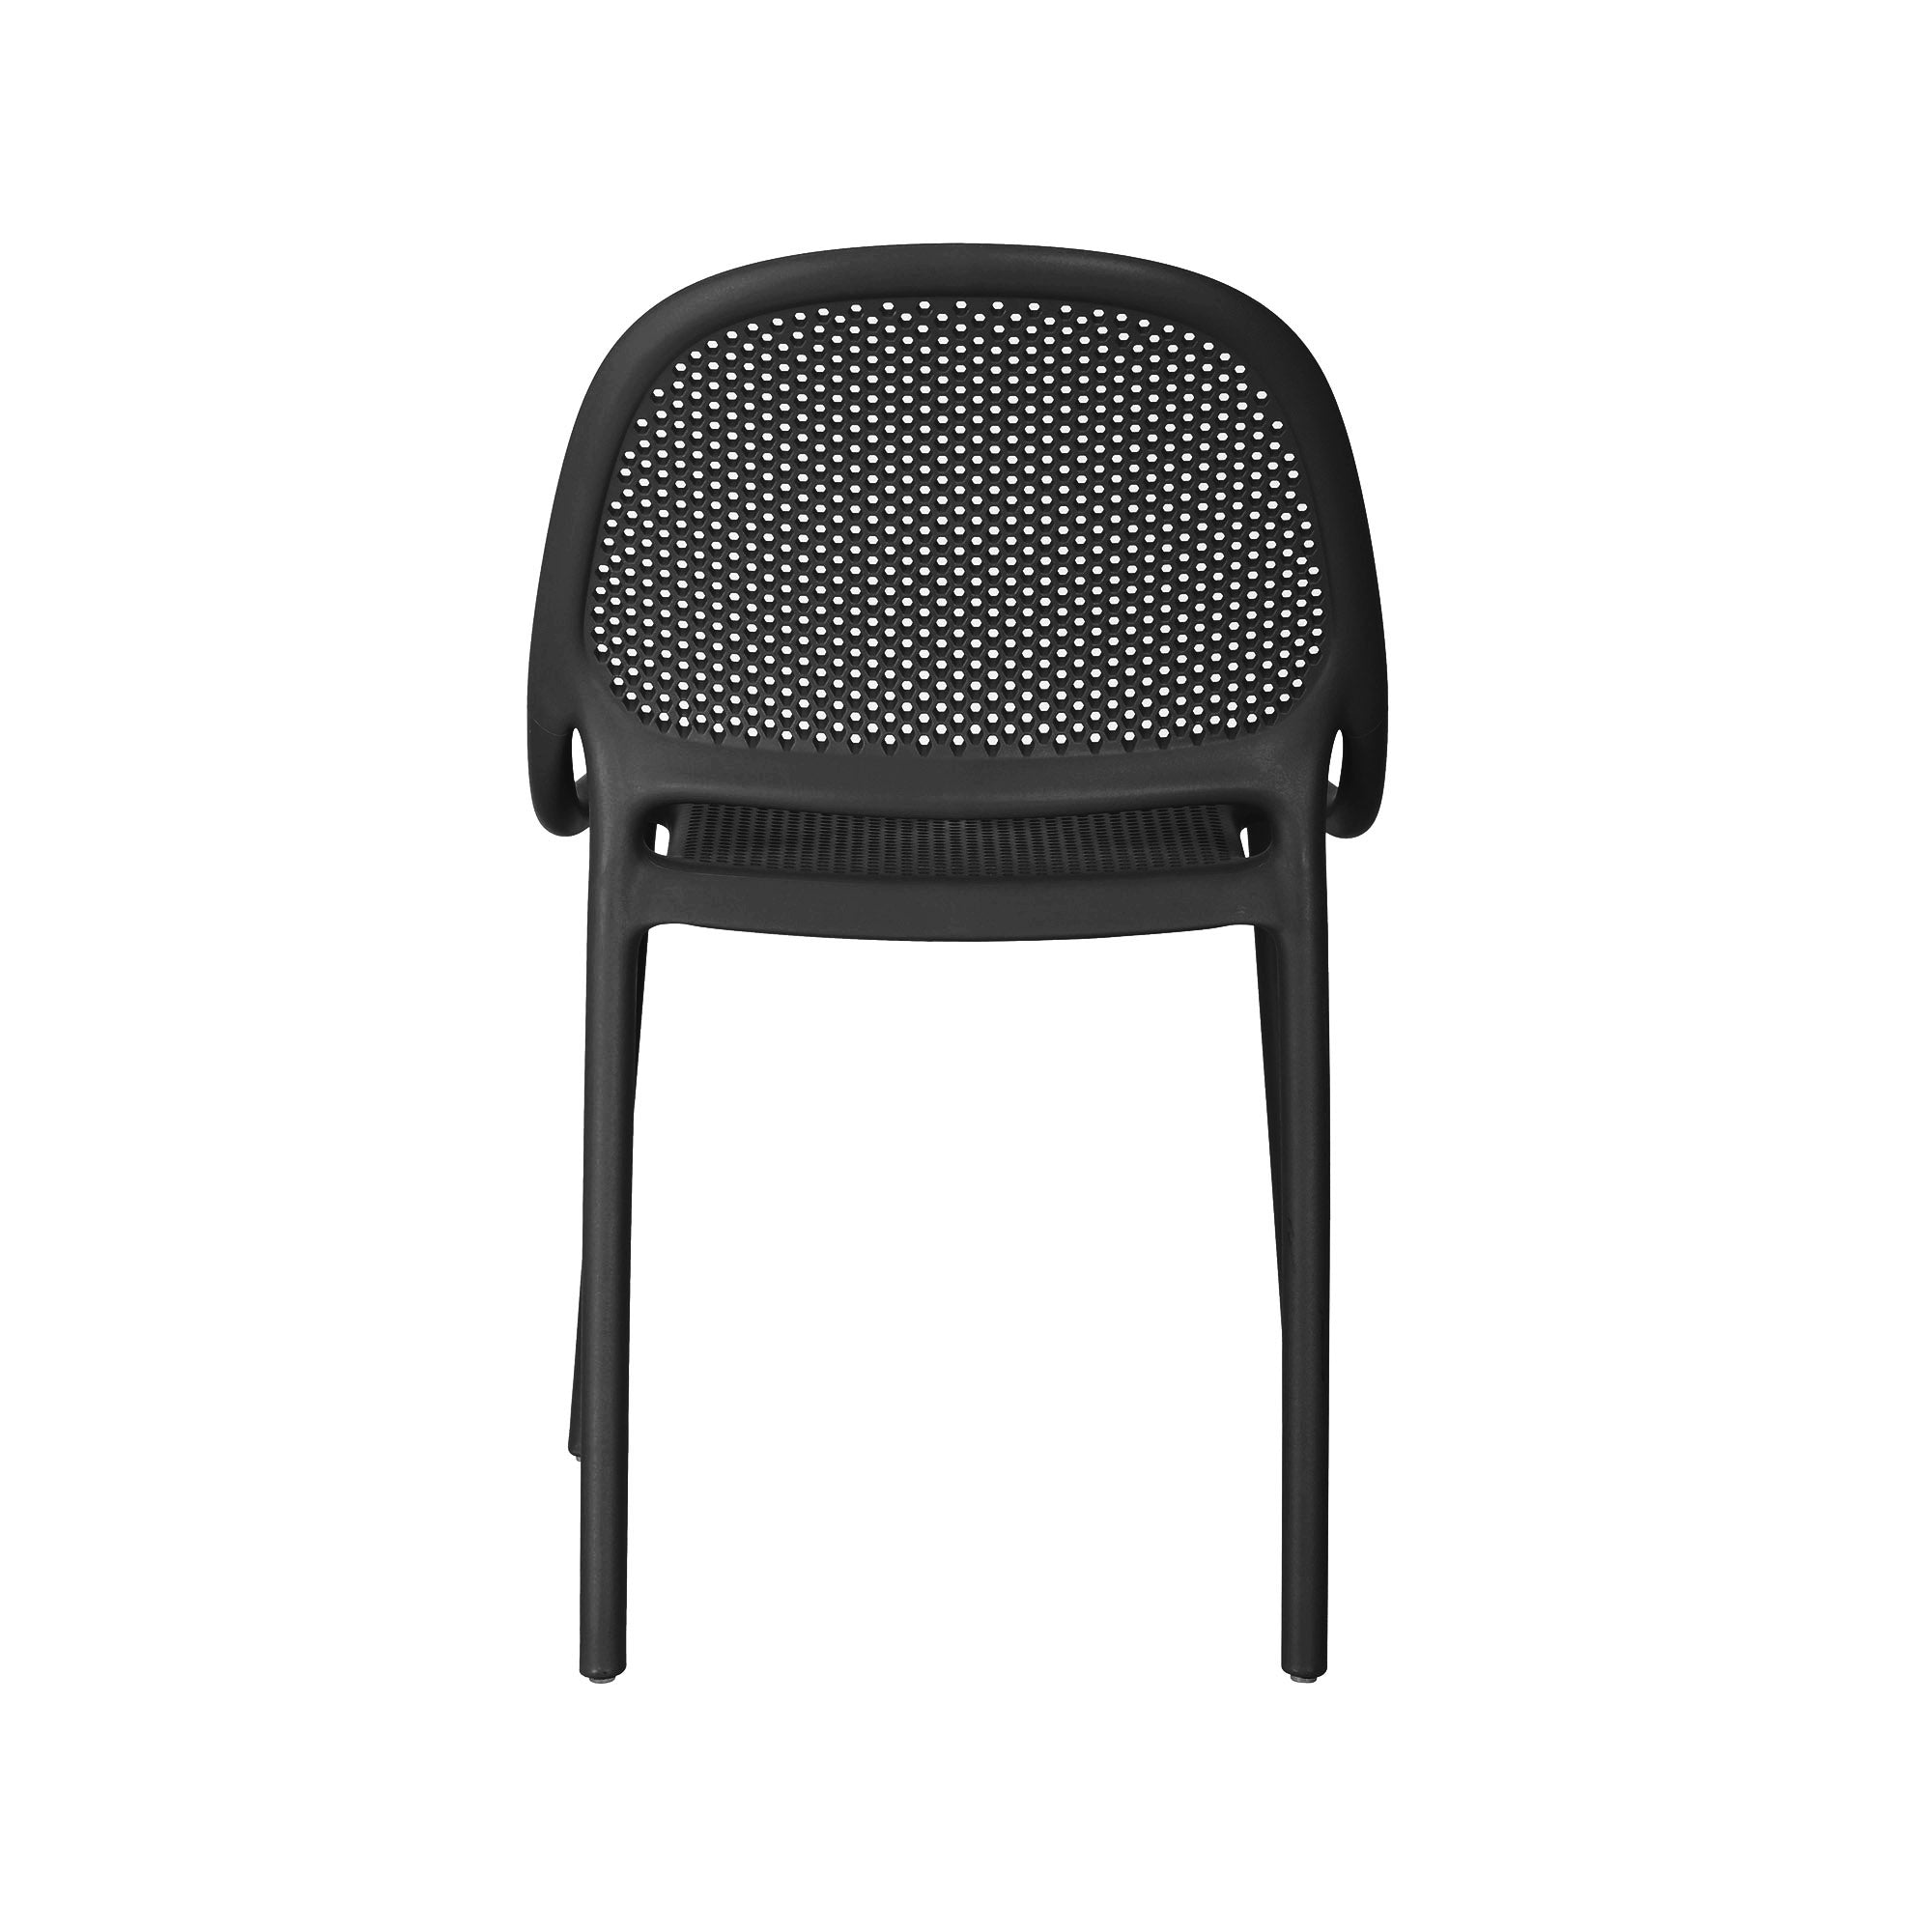 Shay Indoor and Outdoor Stackable Chair - Black - Set of 2